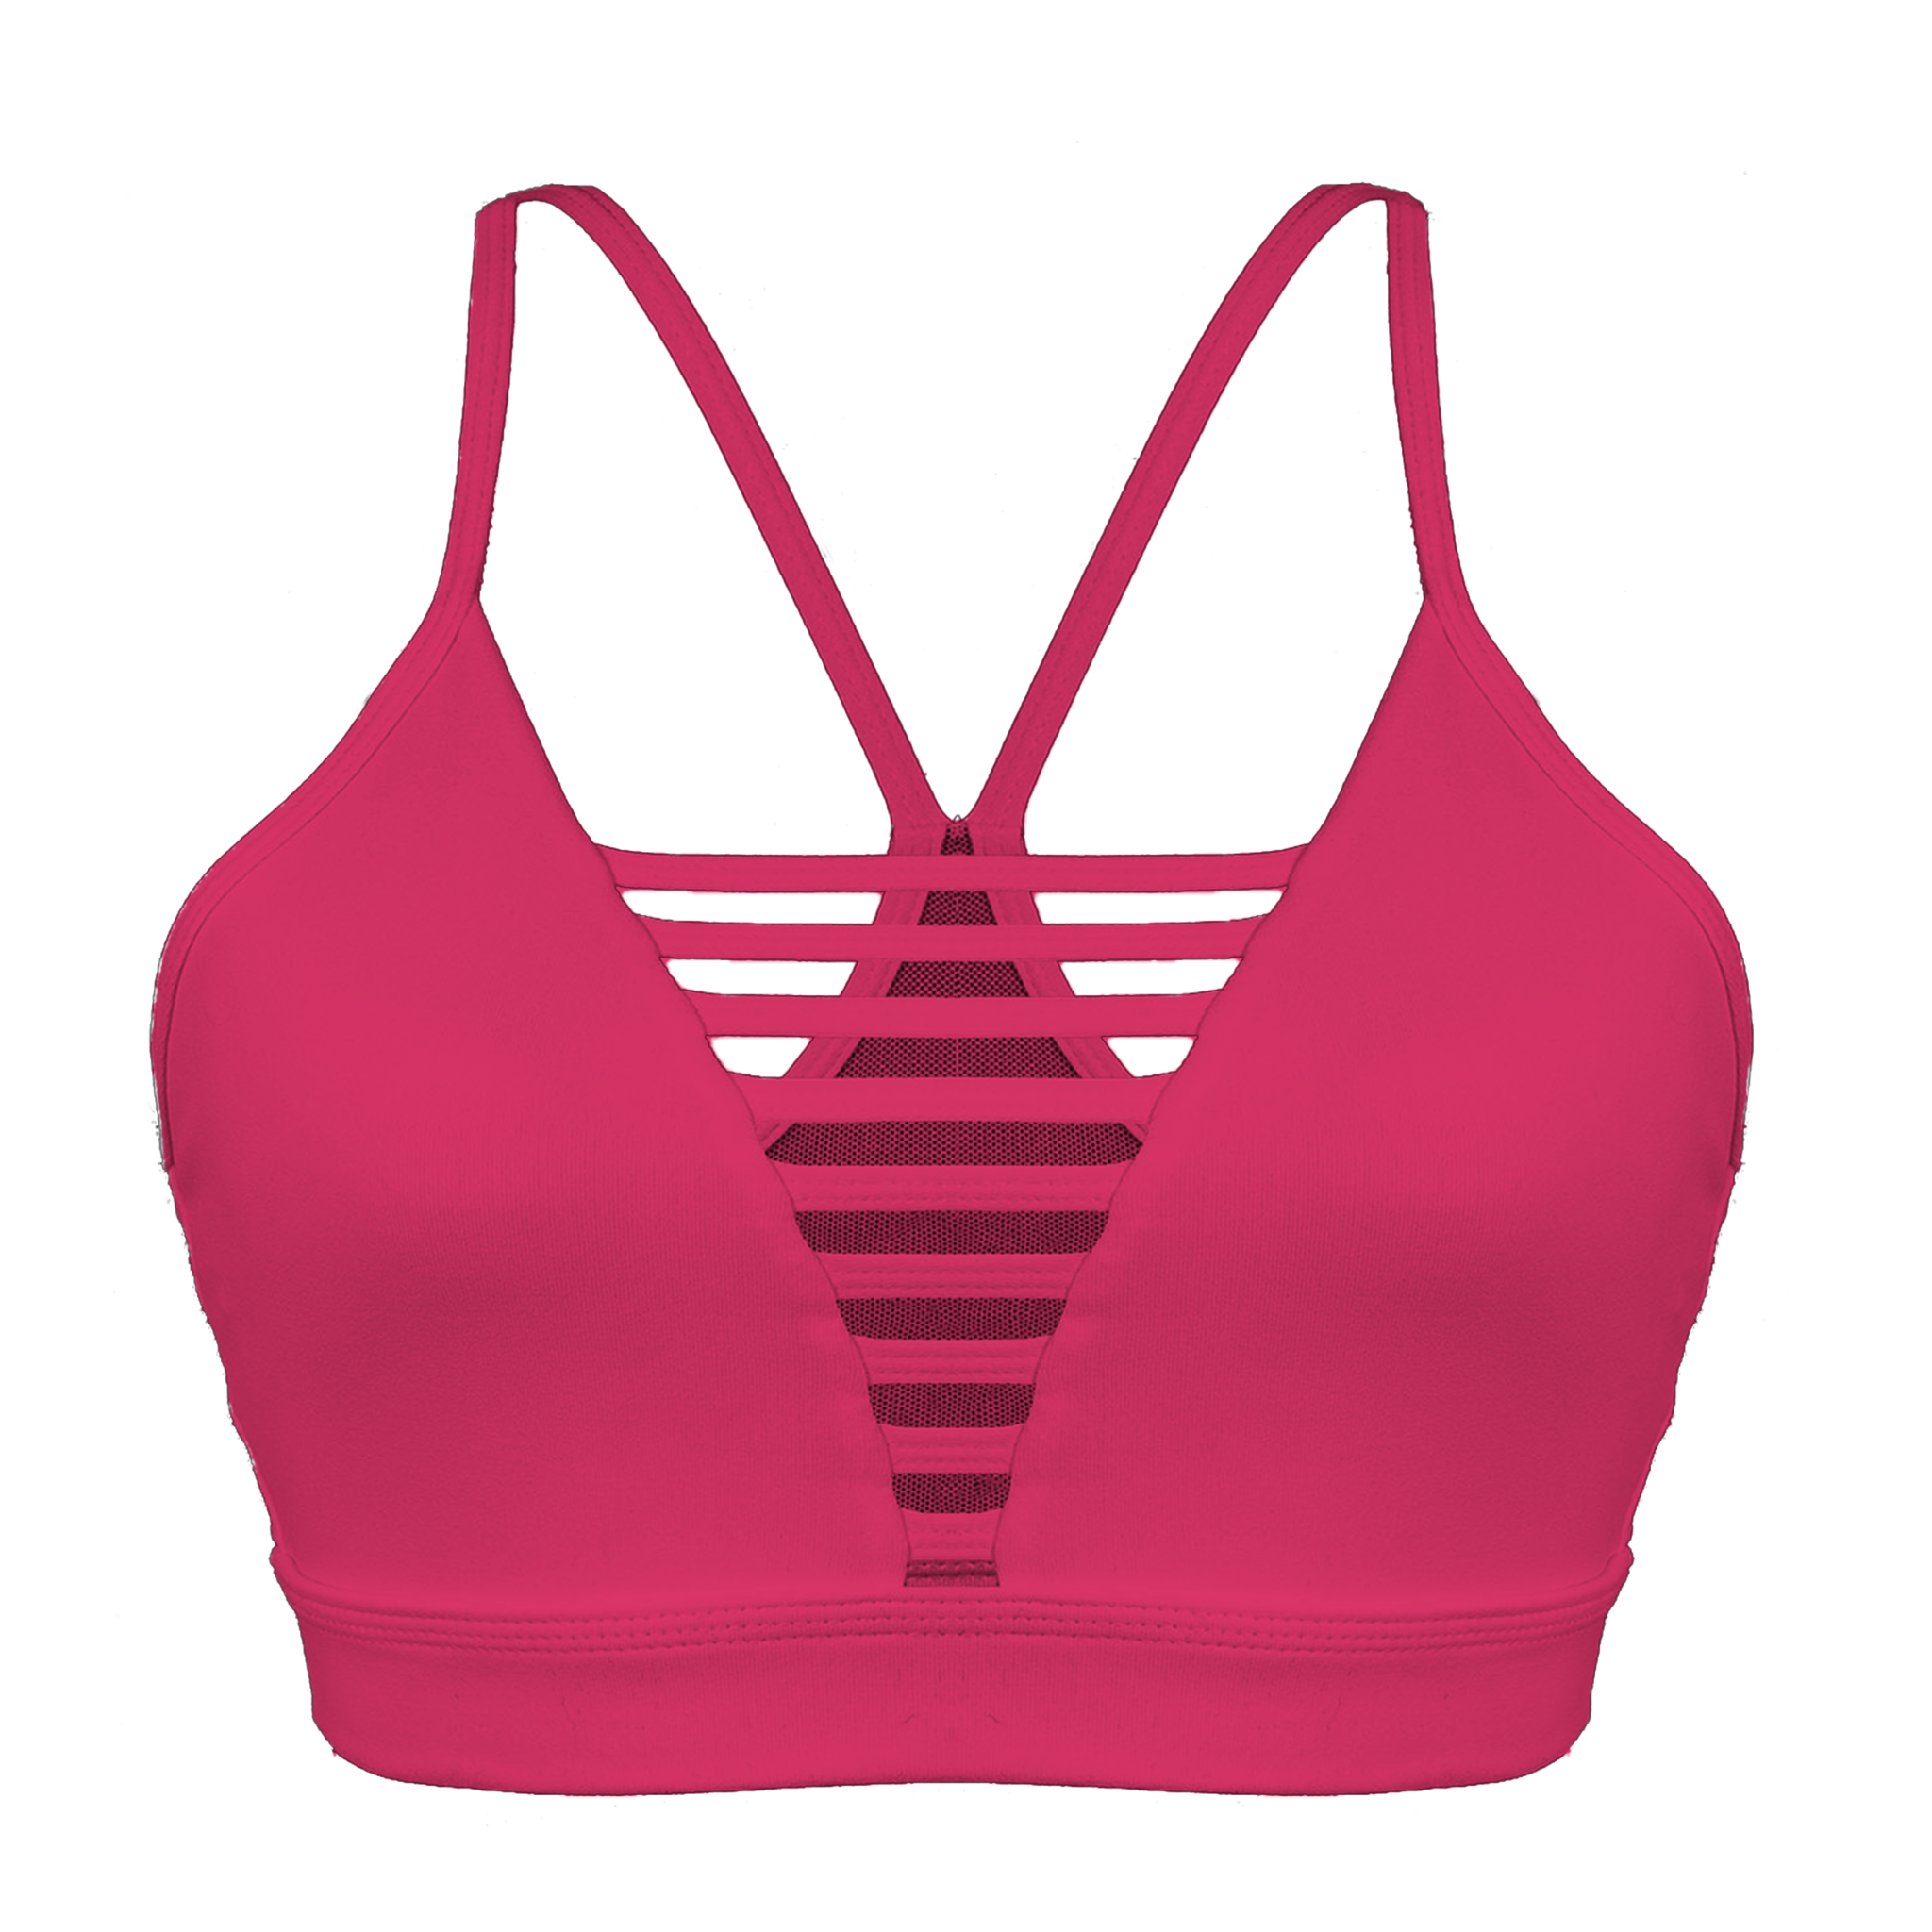 Evolution Sports Bra - Solid Hot Pink, The Barbell Cartel